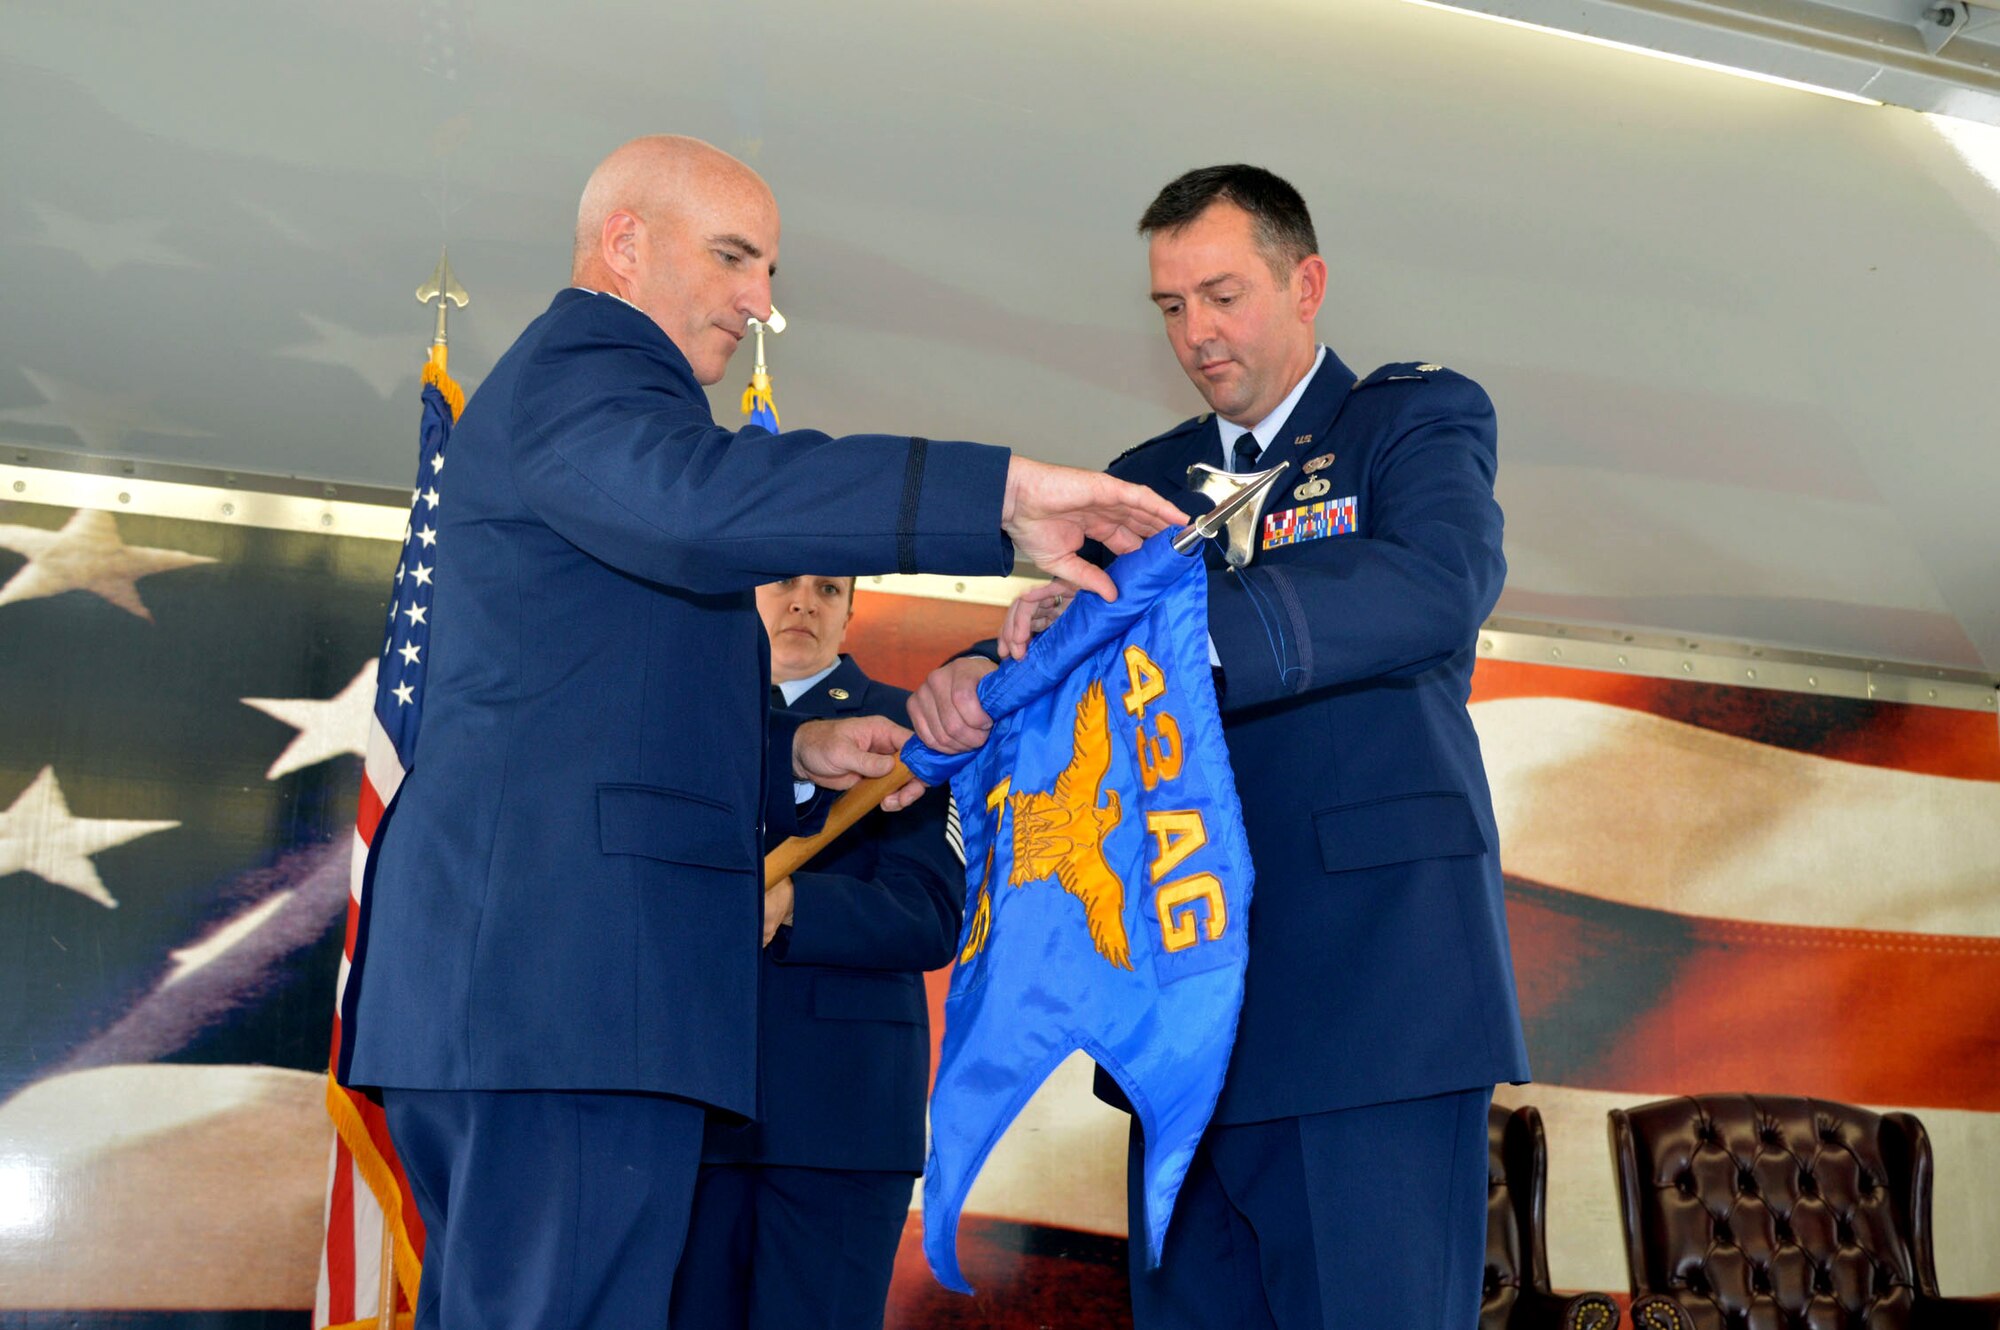 Lt. Col. Brian Ballew, 43rd Force Support Squadron commander, right, and Col. Kenneth Moss, 43rd Airlift Group commander, case the 43rd FSS guidon July 1, 2015, during the 43rd Air Base Squadron redesignation and change of command ceremony at Pope Army Airfield, North Carolina. Force support and logistics Airmen and functions transferred to the newly established 43rd ABS from the inactivated 43rd Logistics Readiness Squadron and the 43rd FSS. (U.S. Air Force photo/Marvin Krause)